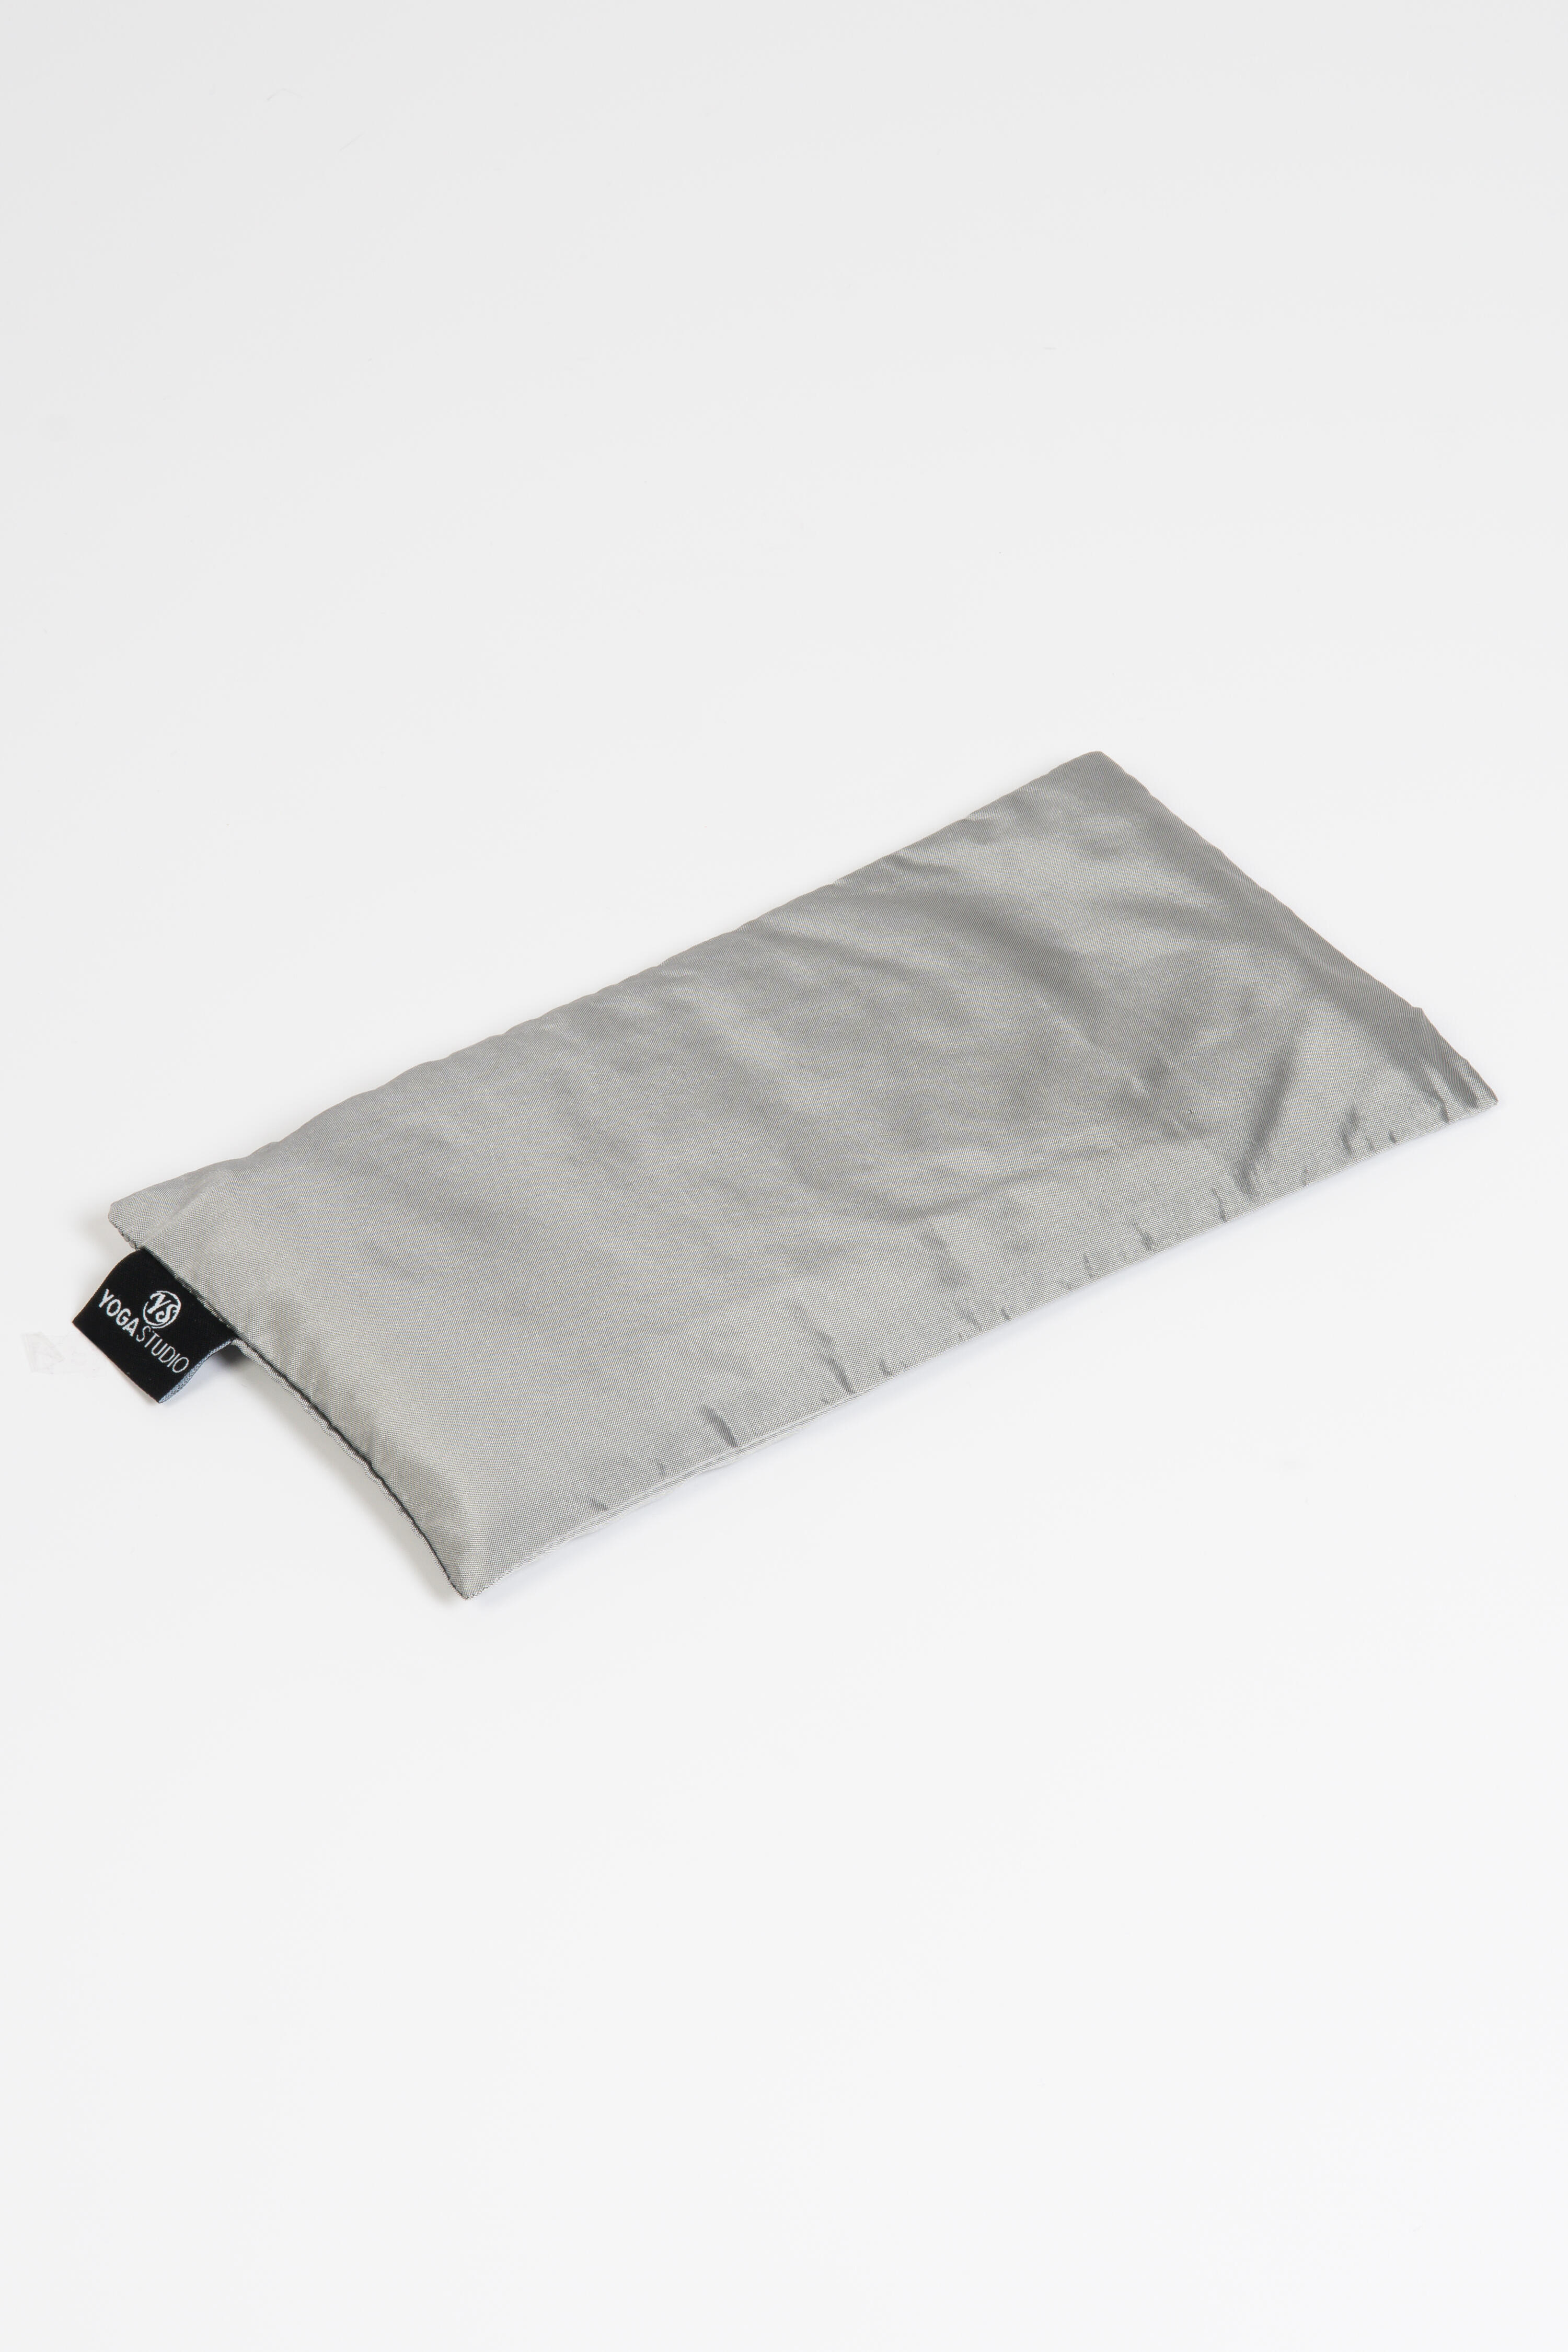 Yoga Studio Scented Lavender & Linseed Eye Pillows - Silver (Silk) 1/2